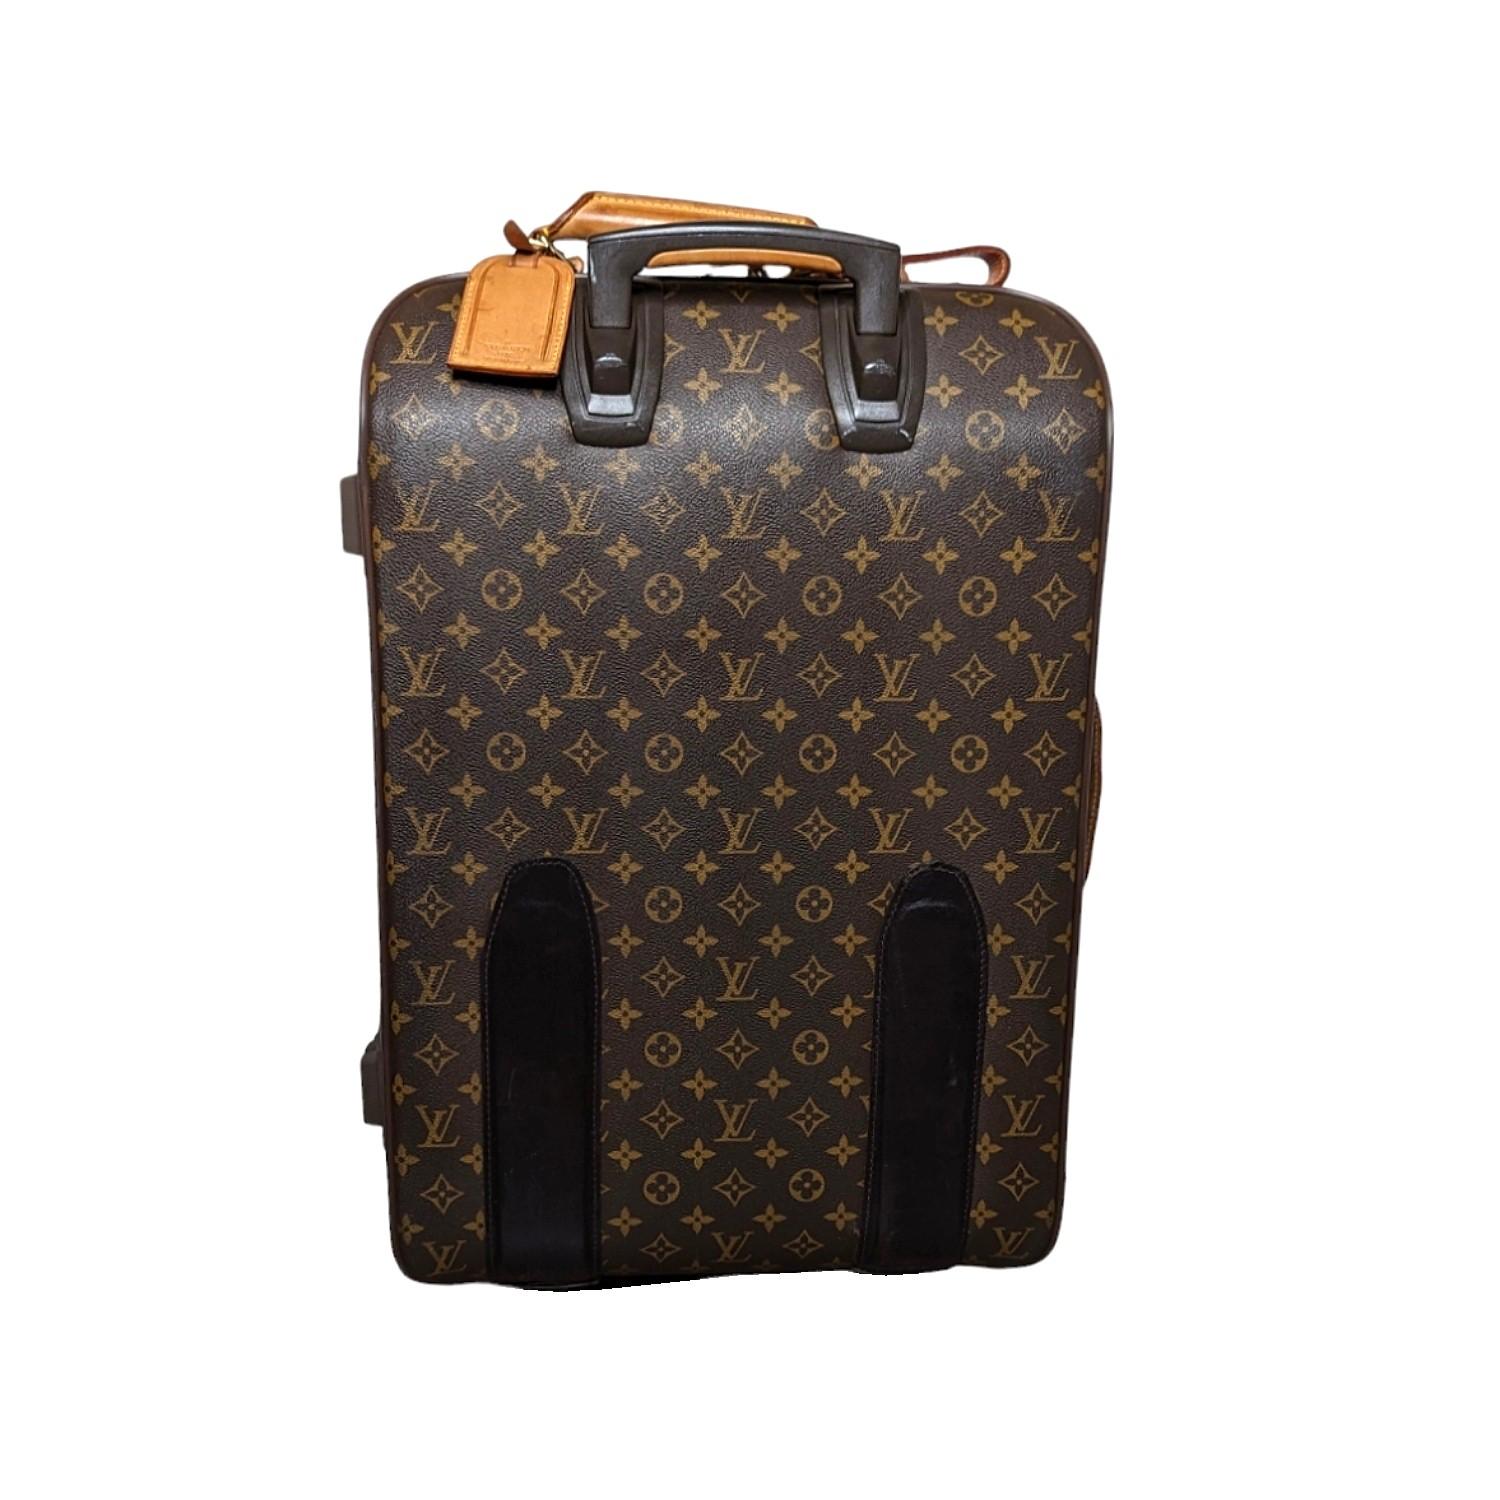 Men's brown and tan monogram coated canvas Louis Vuitton Monogram Pégase 55 with brass hardware, dual handles; one at side and top, retractable pull-handle at top, single exterior pocket at front, dual wheels at base, brown canvas lining, dual